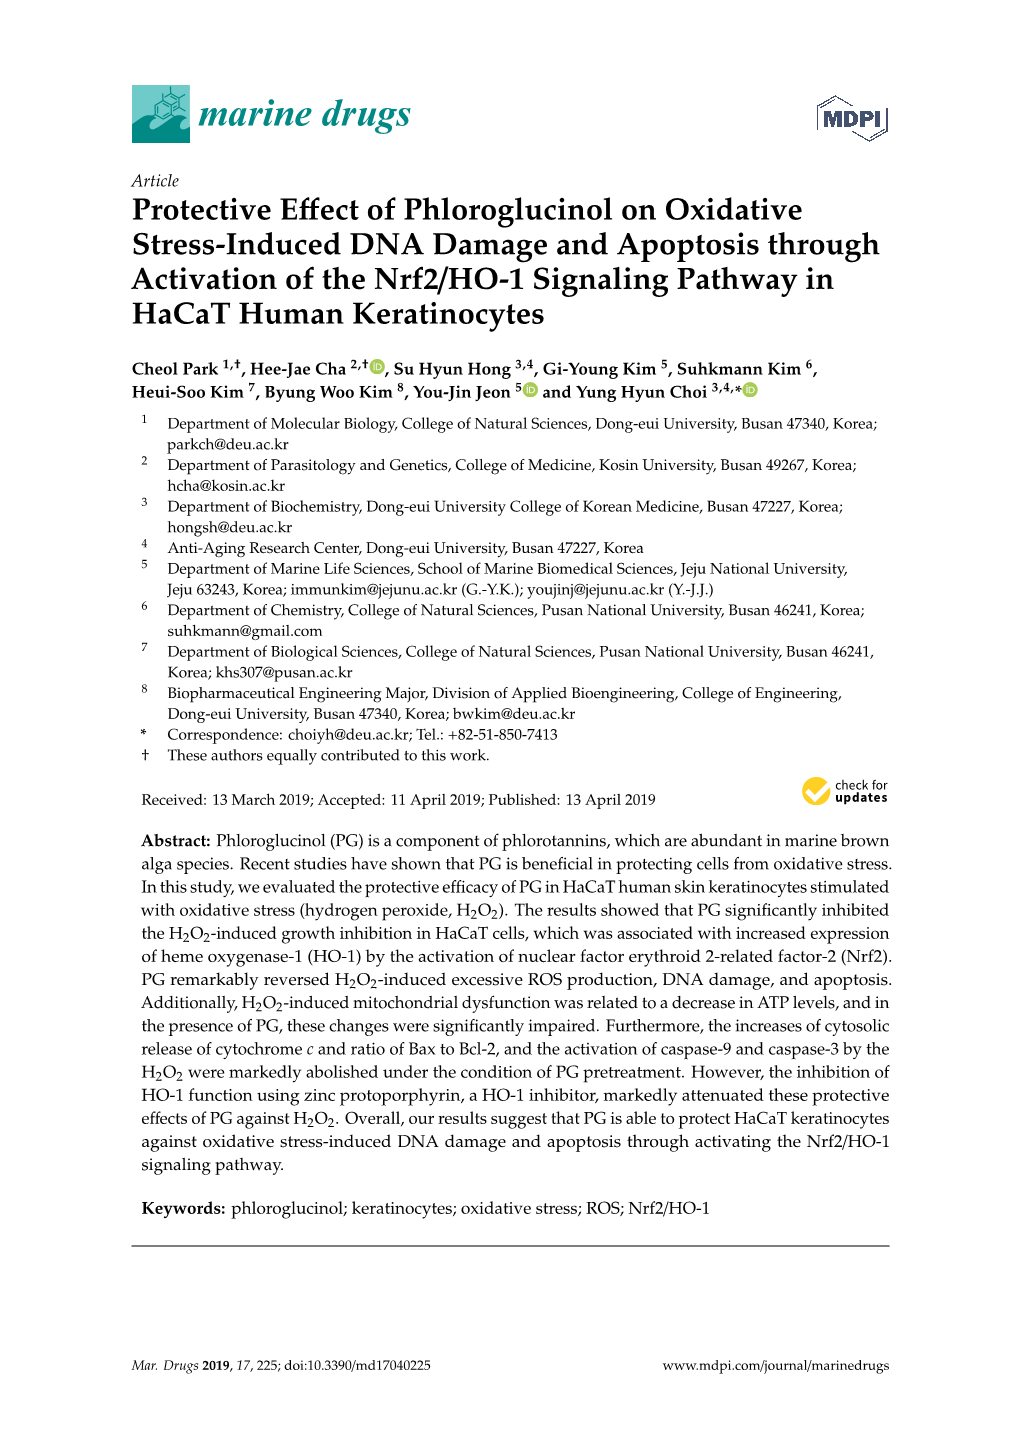 Protective Effect of Phloroglucinol on Oxidative Stress-Induced DNA